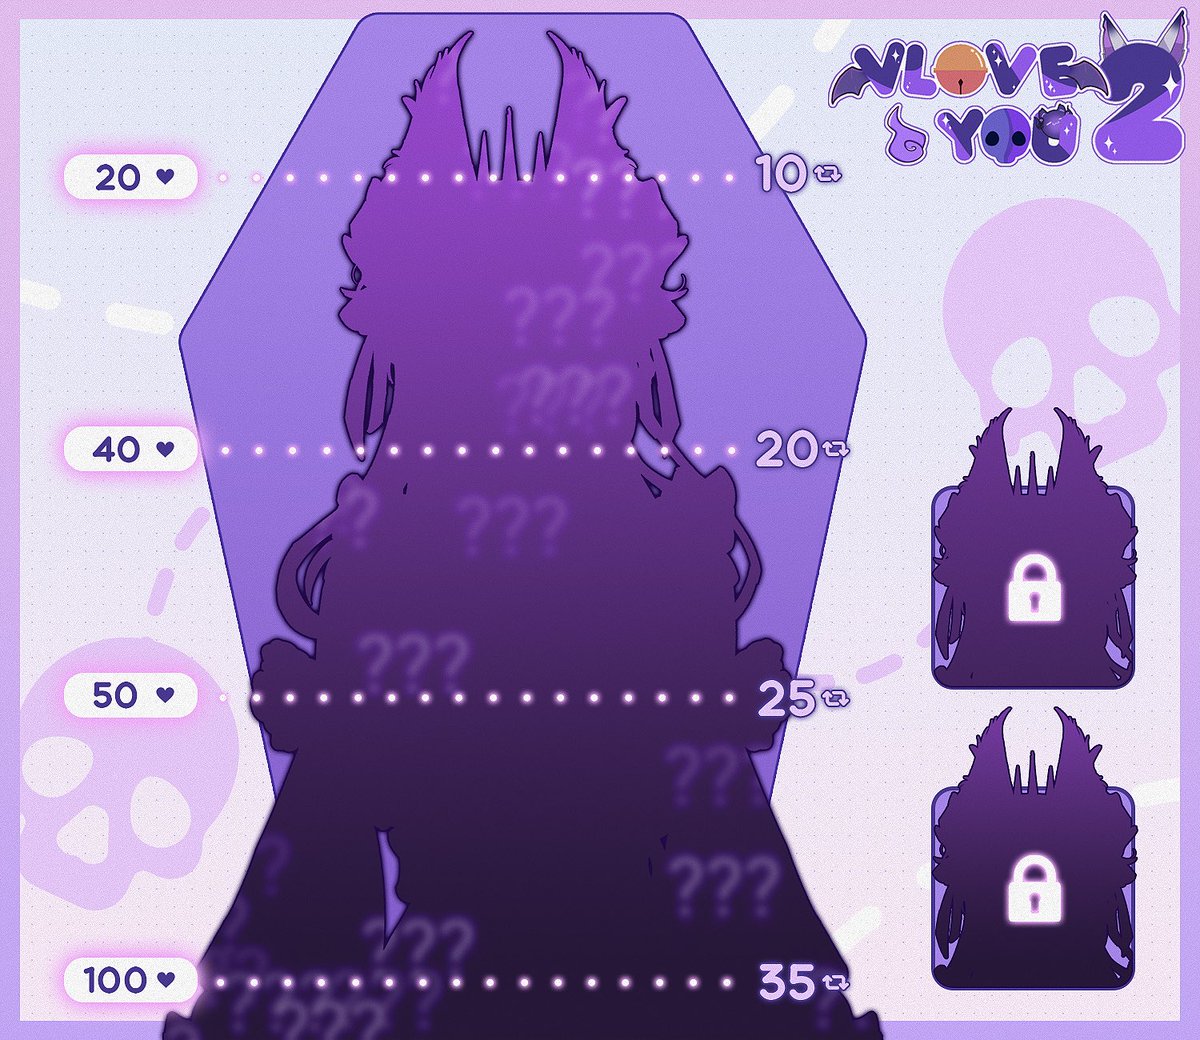 💀 ┆ model reveal ! ₊˚⊹ ᰔ

✦ . 　⁺ 　 . ✦ . 　⁺ 　 . ✦

💜 behold, mortals! it is i, himemori, your beloved death kitsune, emerging from the shadows to guide new souls into the unknown!  

♡ + ↻ to reveal me!

꒰🔮꒱ #visualnovel #vly2 #CSvnjam #vtuber ✦